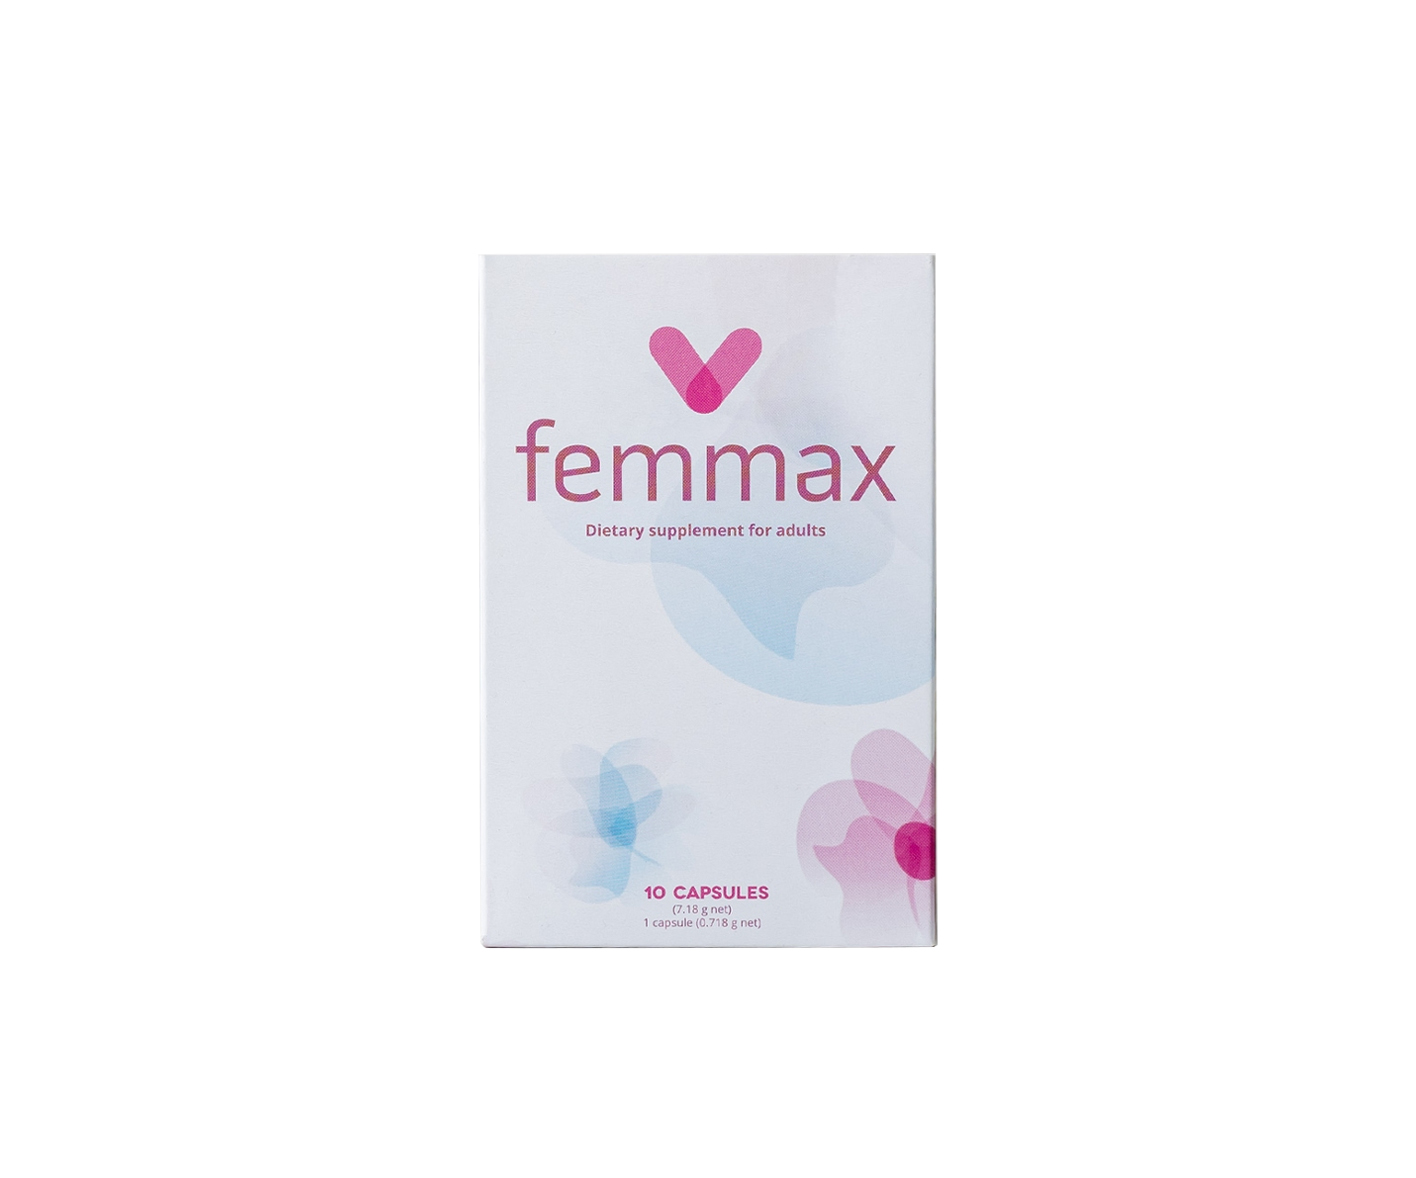 Femmax, pills for libido and improving the quality of intimate life for women